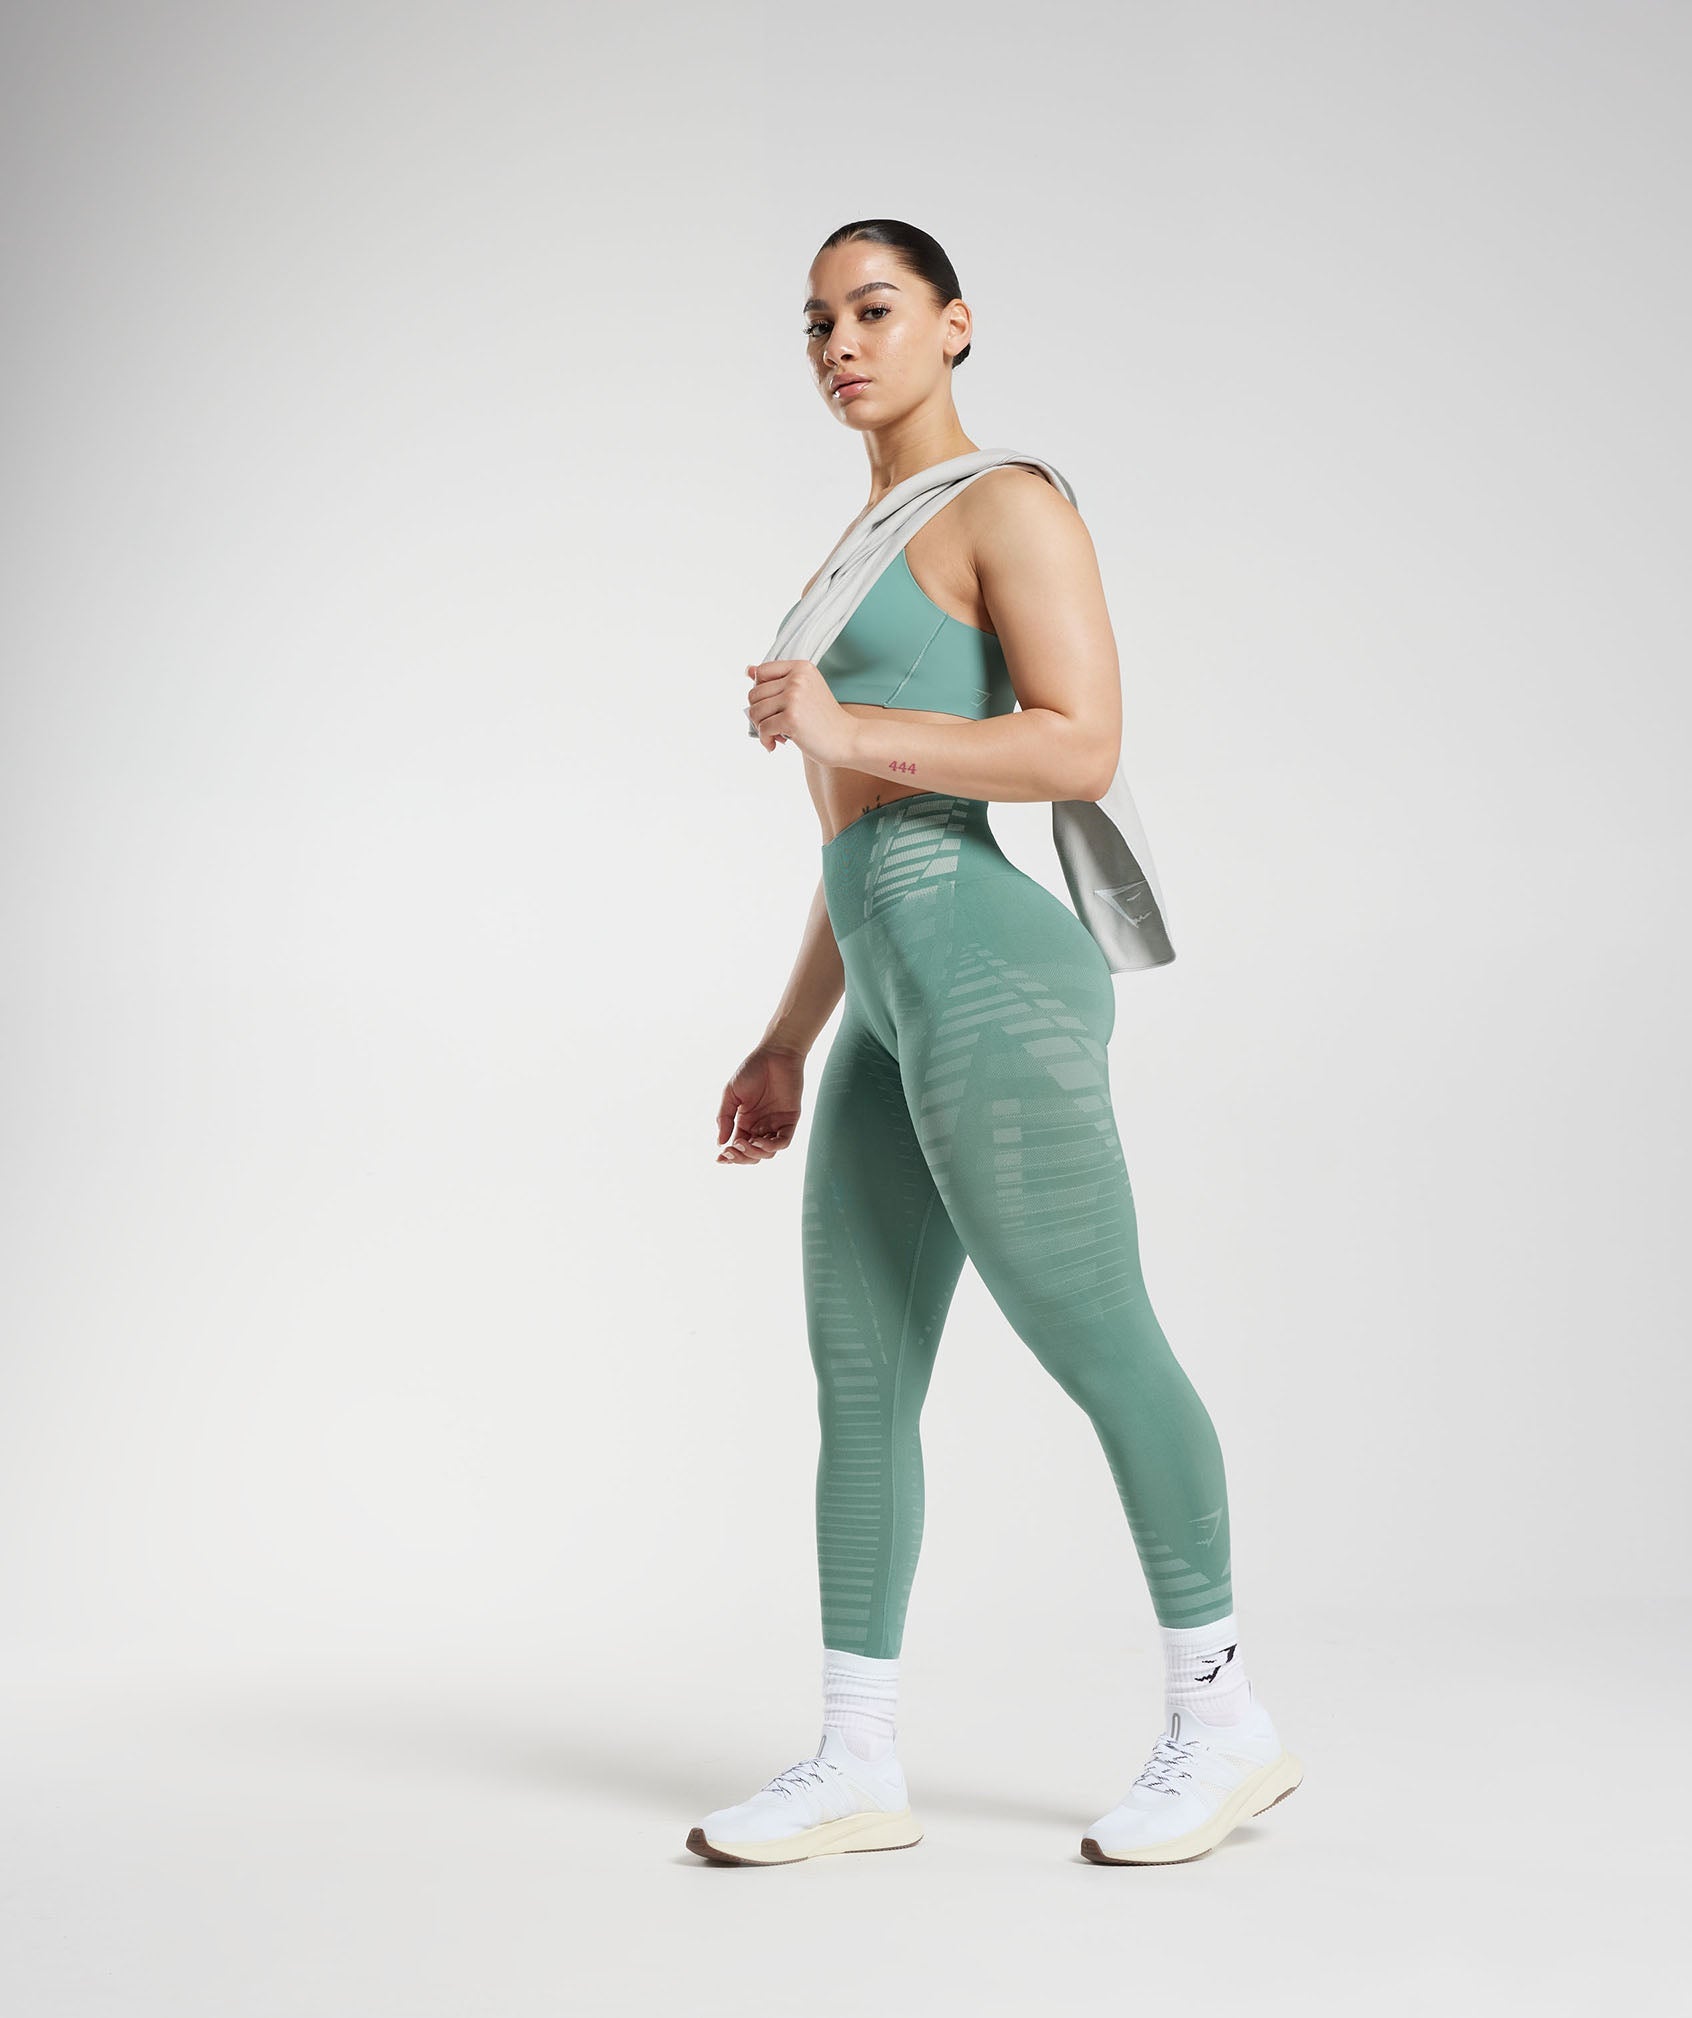 Apex Limit Leggings in Ink Teal/Frost Teal - view 4